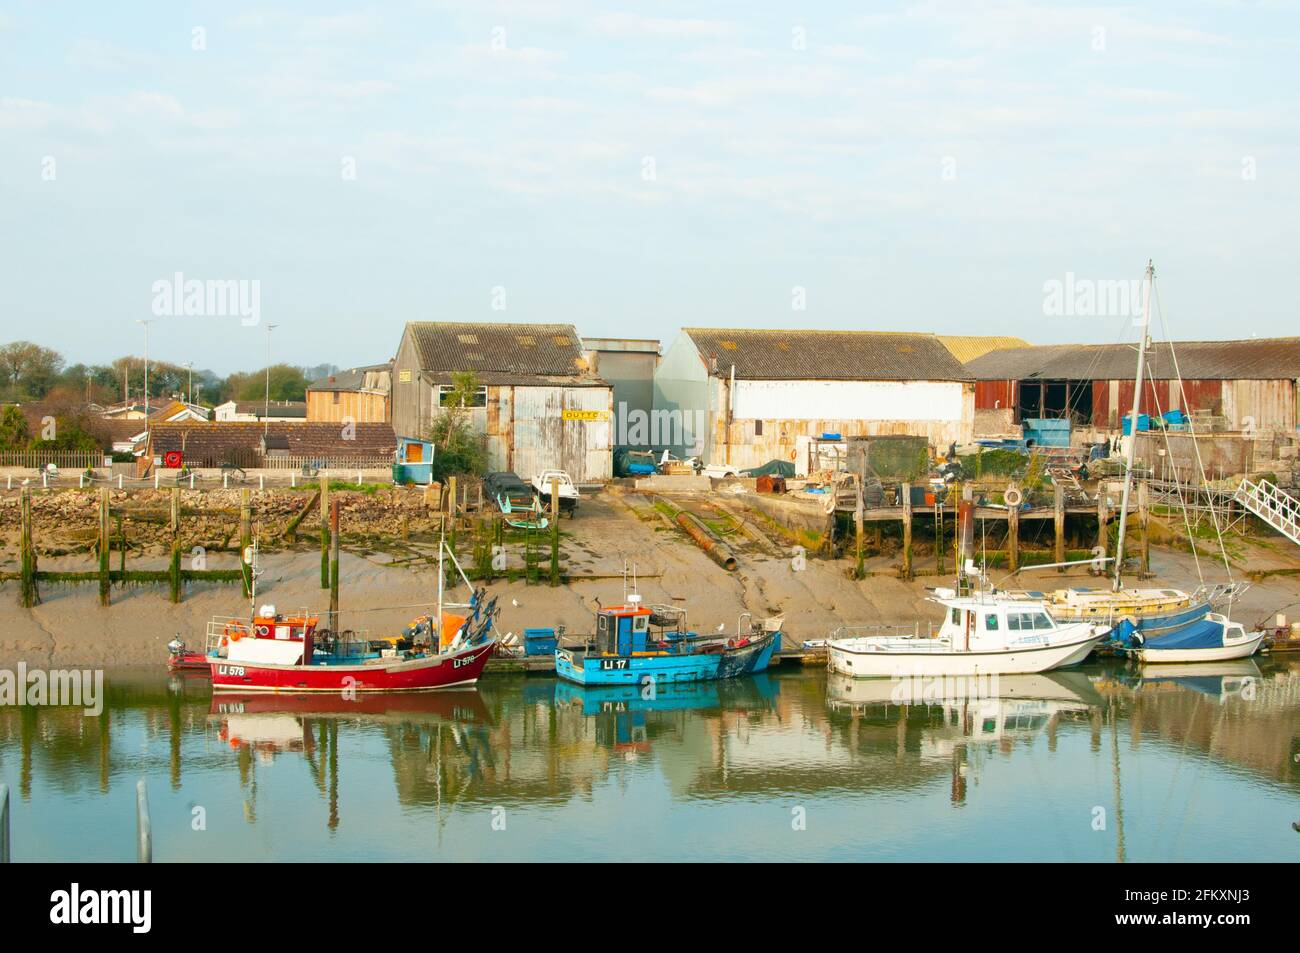 View of Arun boatyard and boats, Littlehampton, West Sussex UK Stock Photo